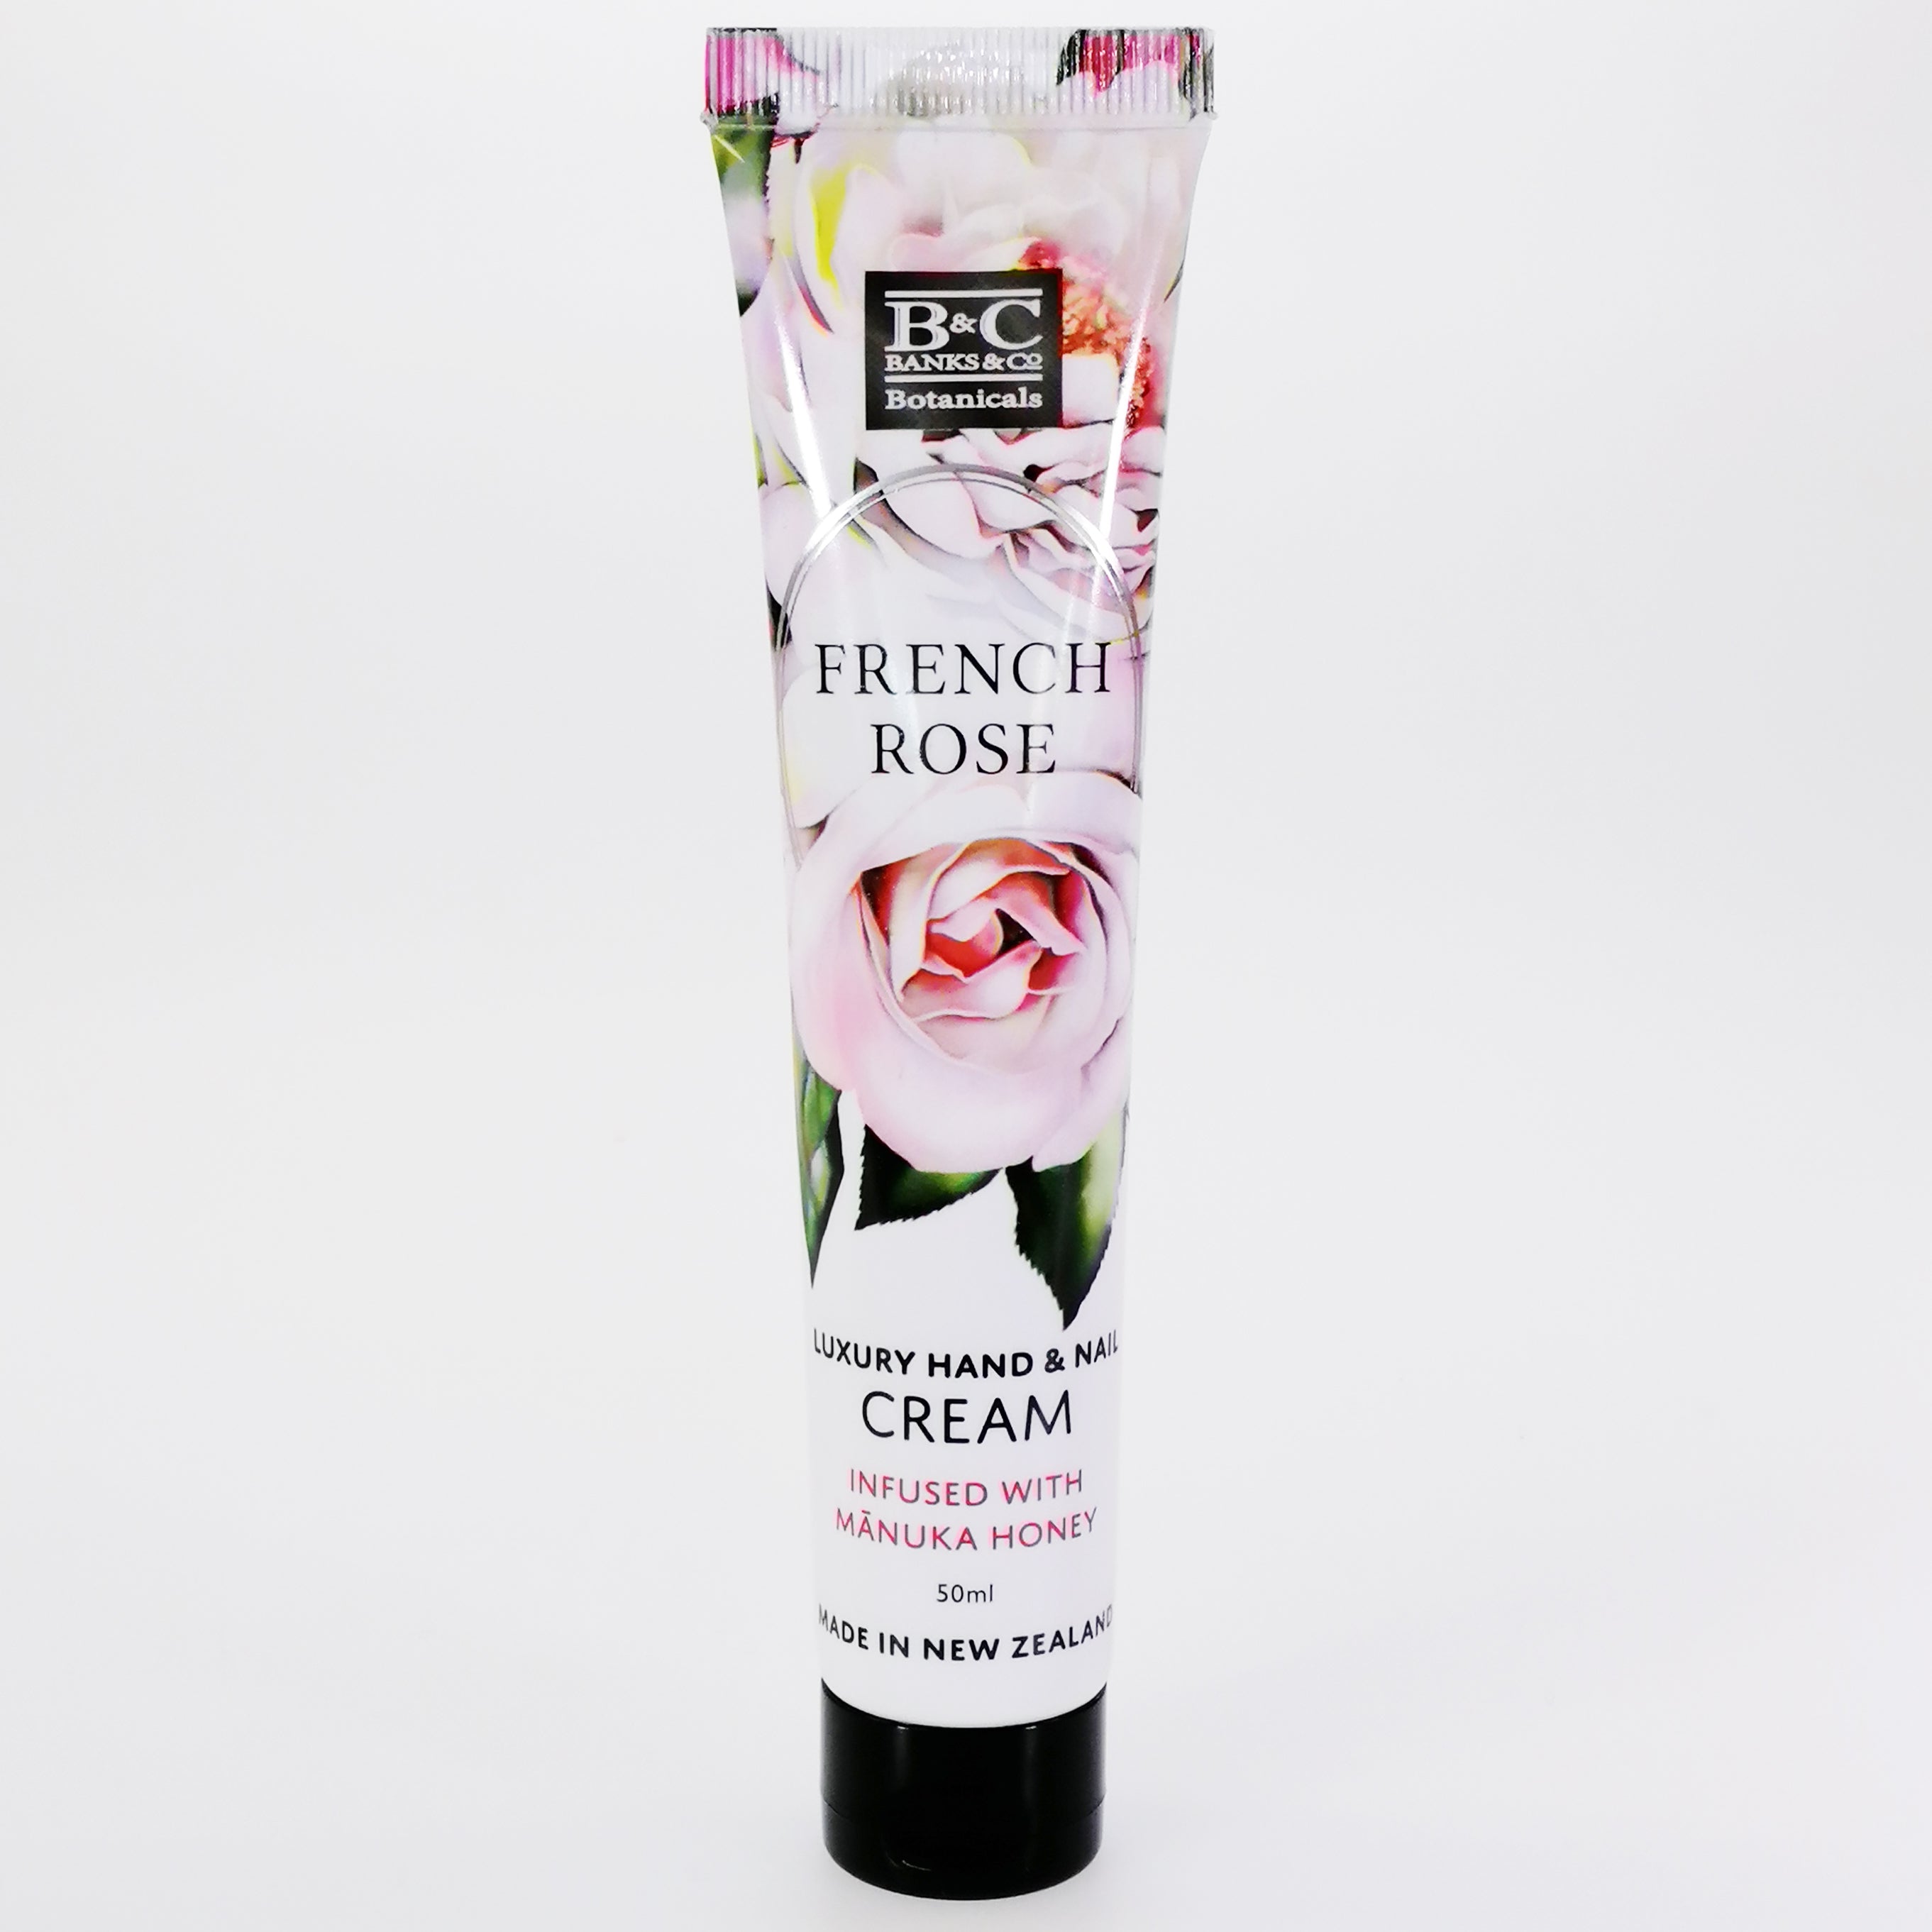 Banks & Co. Luxury Hand & Nail Cream - French Rose - 50ml